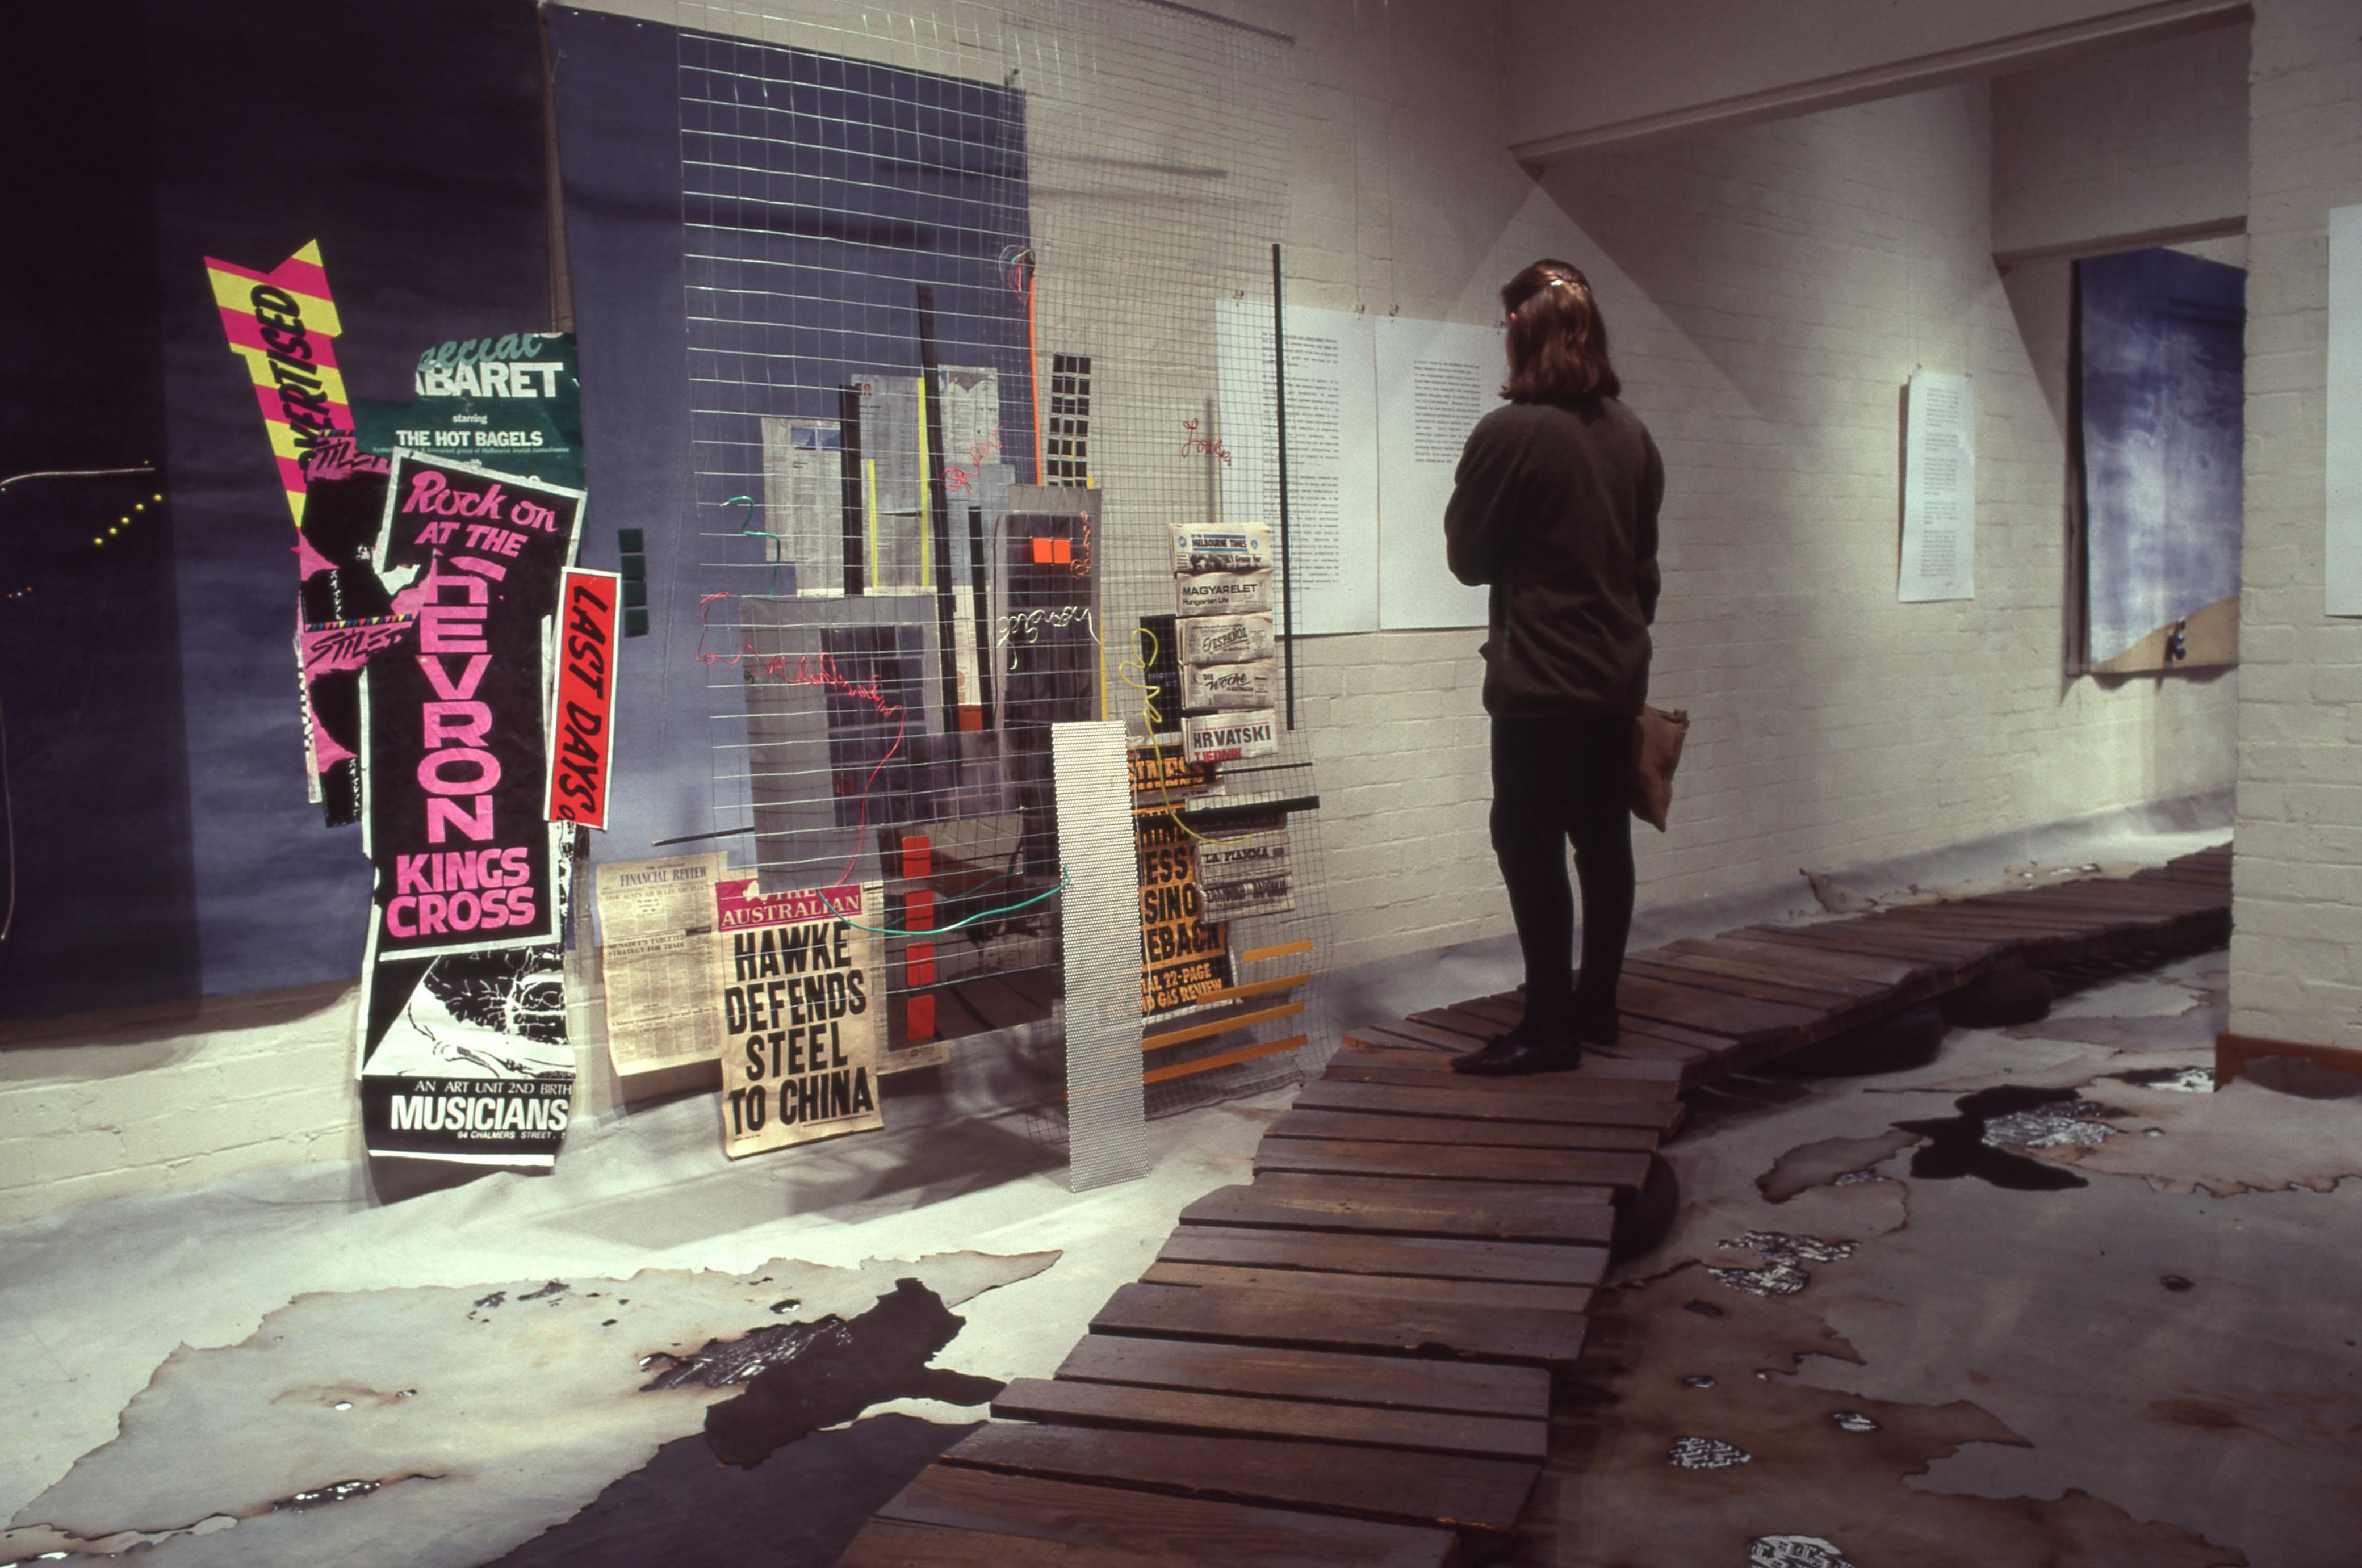 idg_archive_1985_peace_and_nuclear_war_in_the_australian_landscape_004_install.jpg